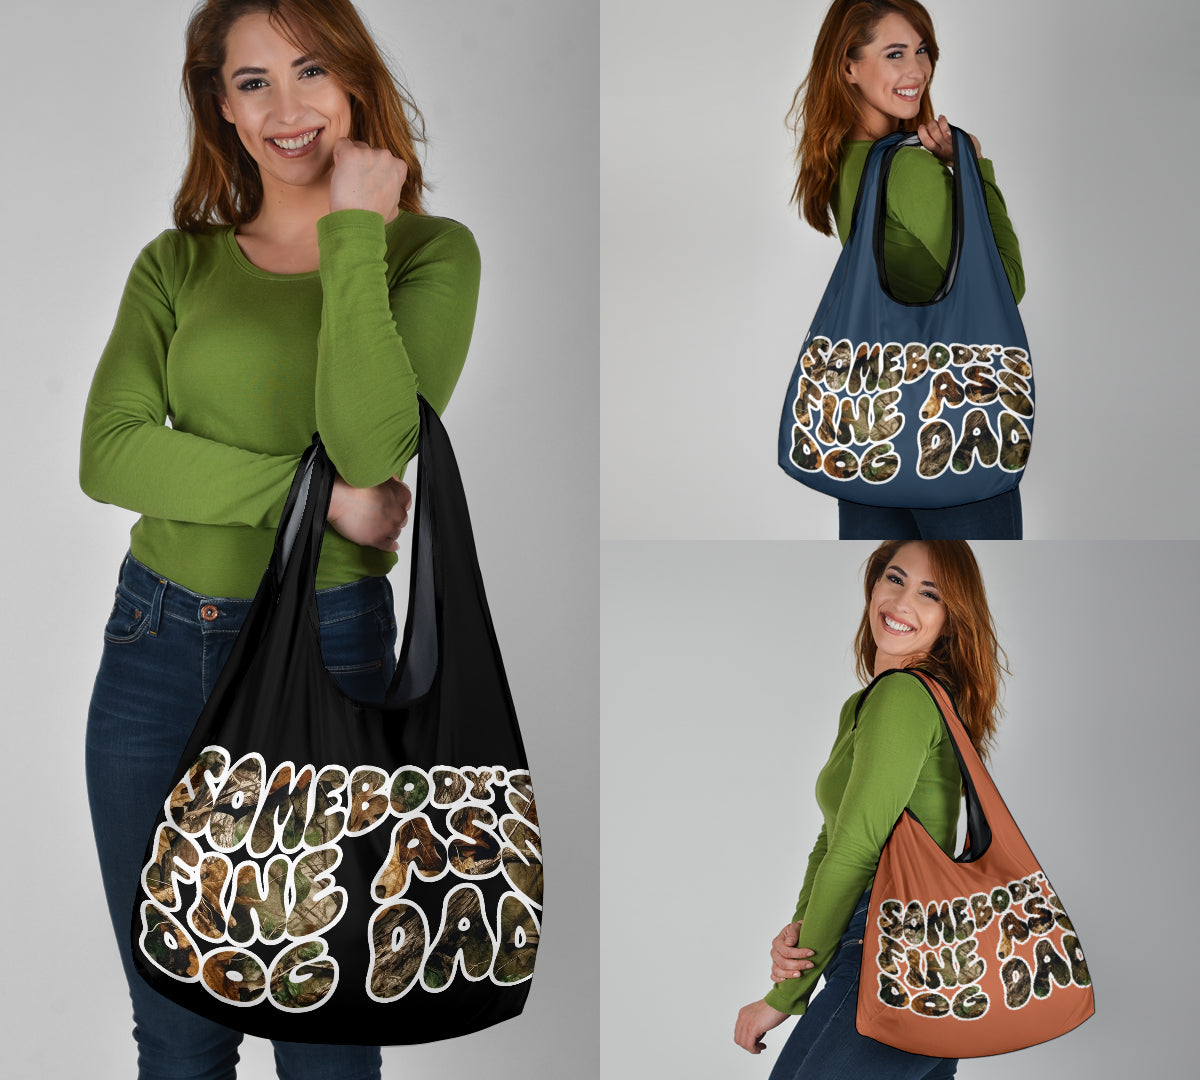 Somebody's Fine Ass Dog Dad Mossy Oak Design 3 Pack Grocery Bags - Mom and Dad Collection